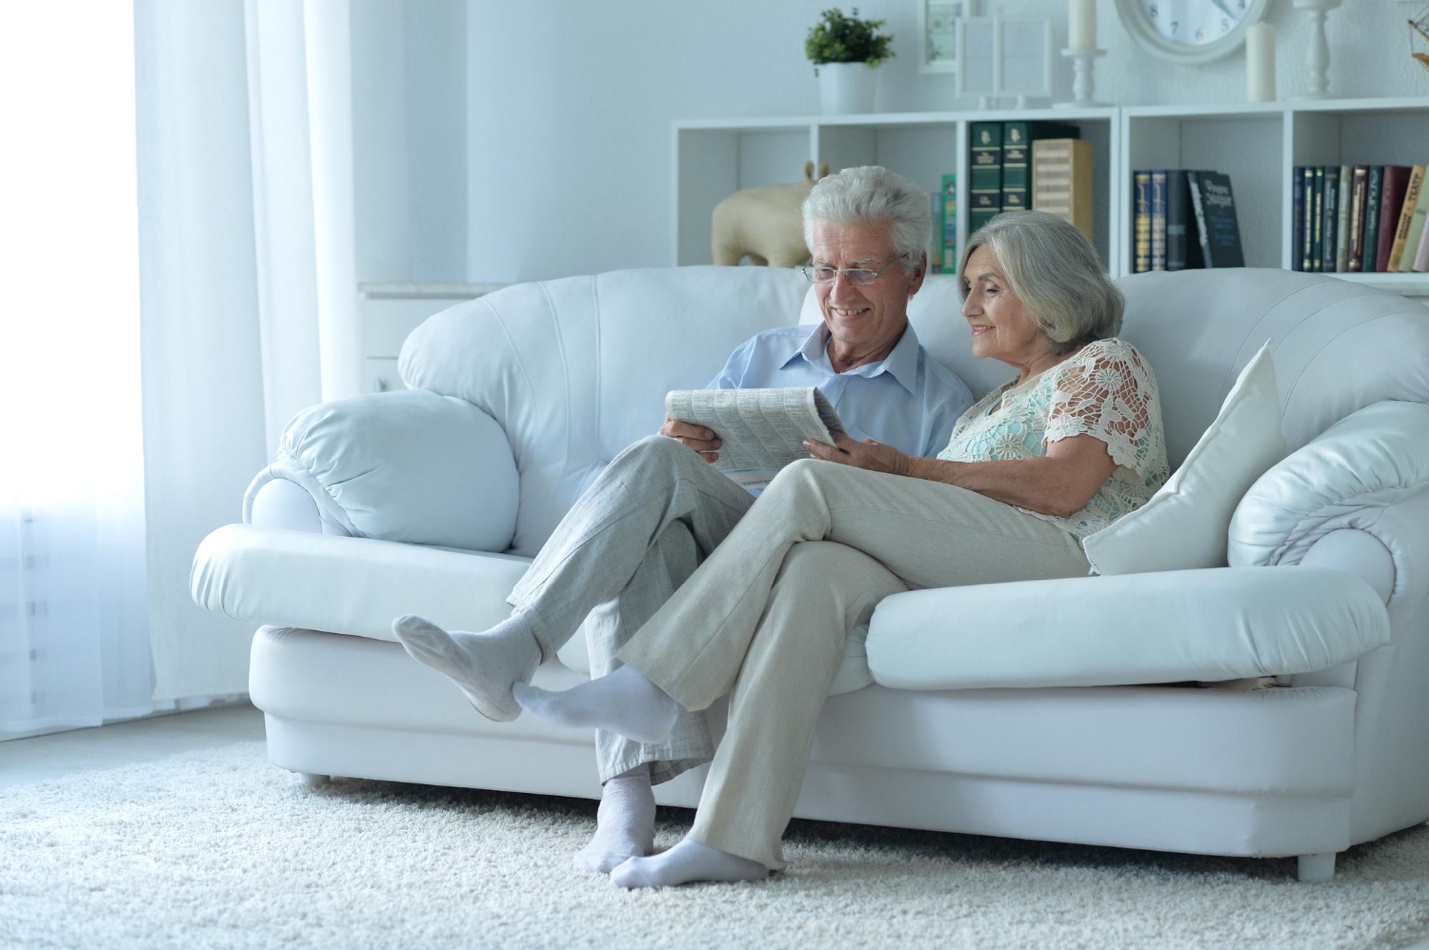 An elderly couple sitting on a white couch, enjoying a safe and comfortable retirement at home.